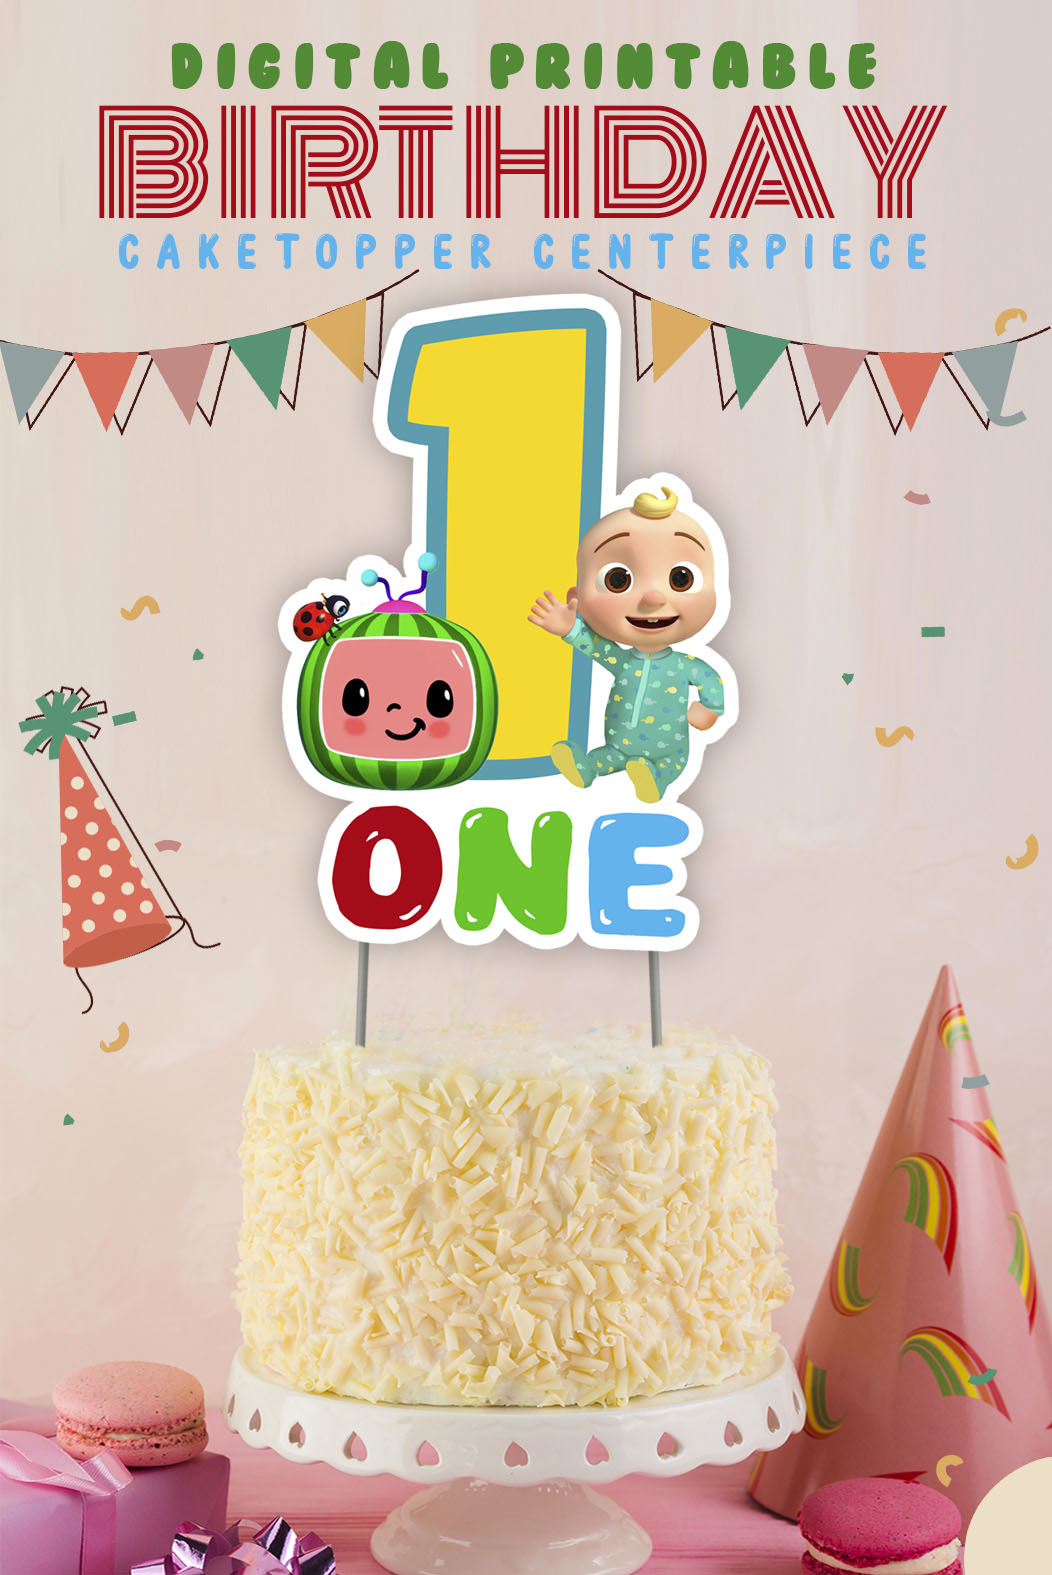 Free Happy Birthday Cake Topper Template - Download in PDF, Illustrator,  EPS, SVG, JPG, PNG | Template.net